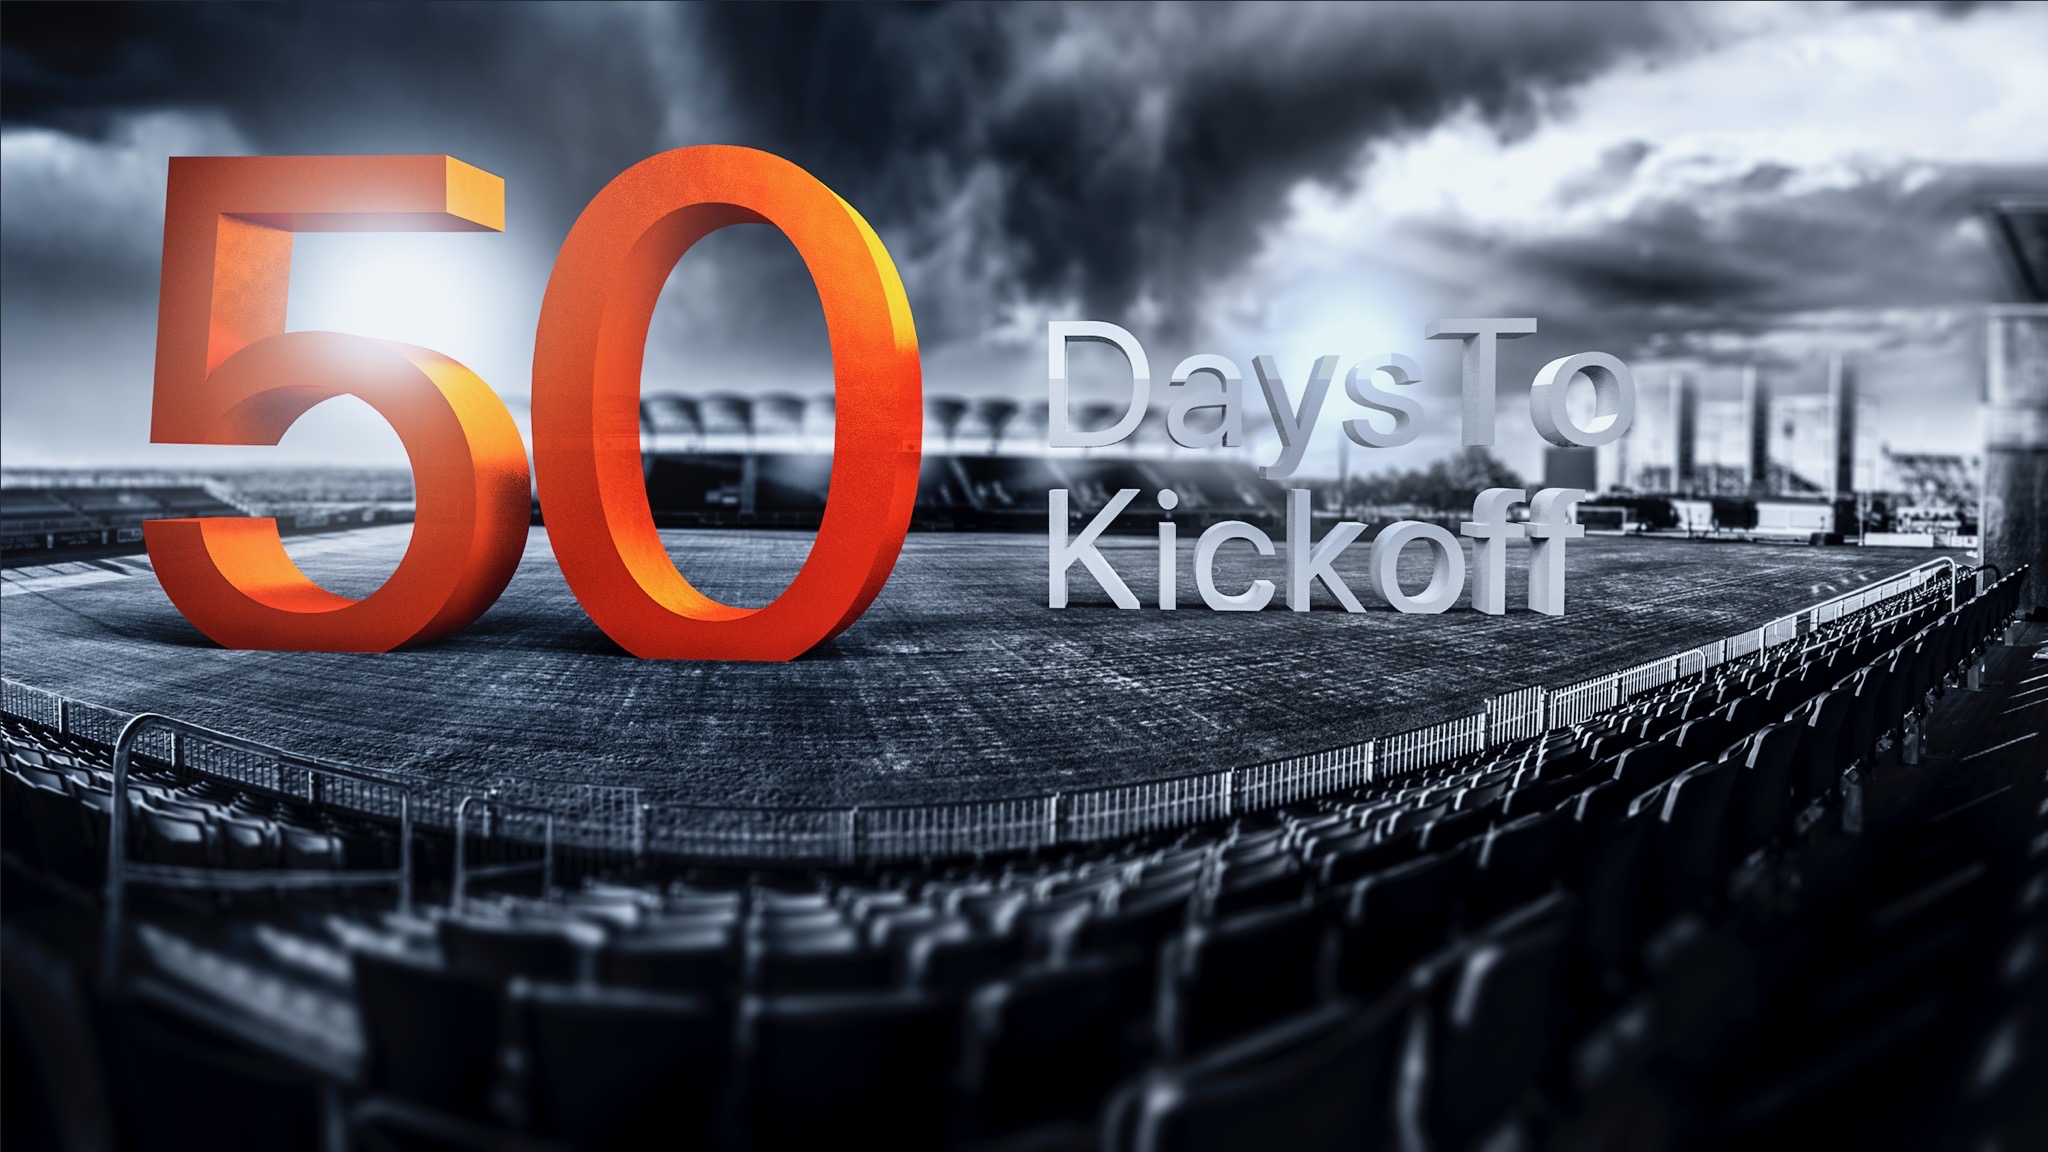 Just 50 Days To Kickoff!